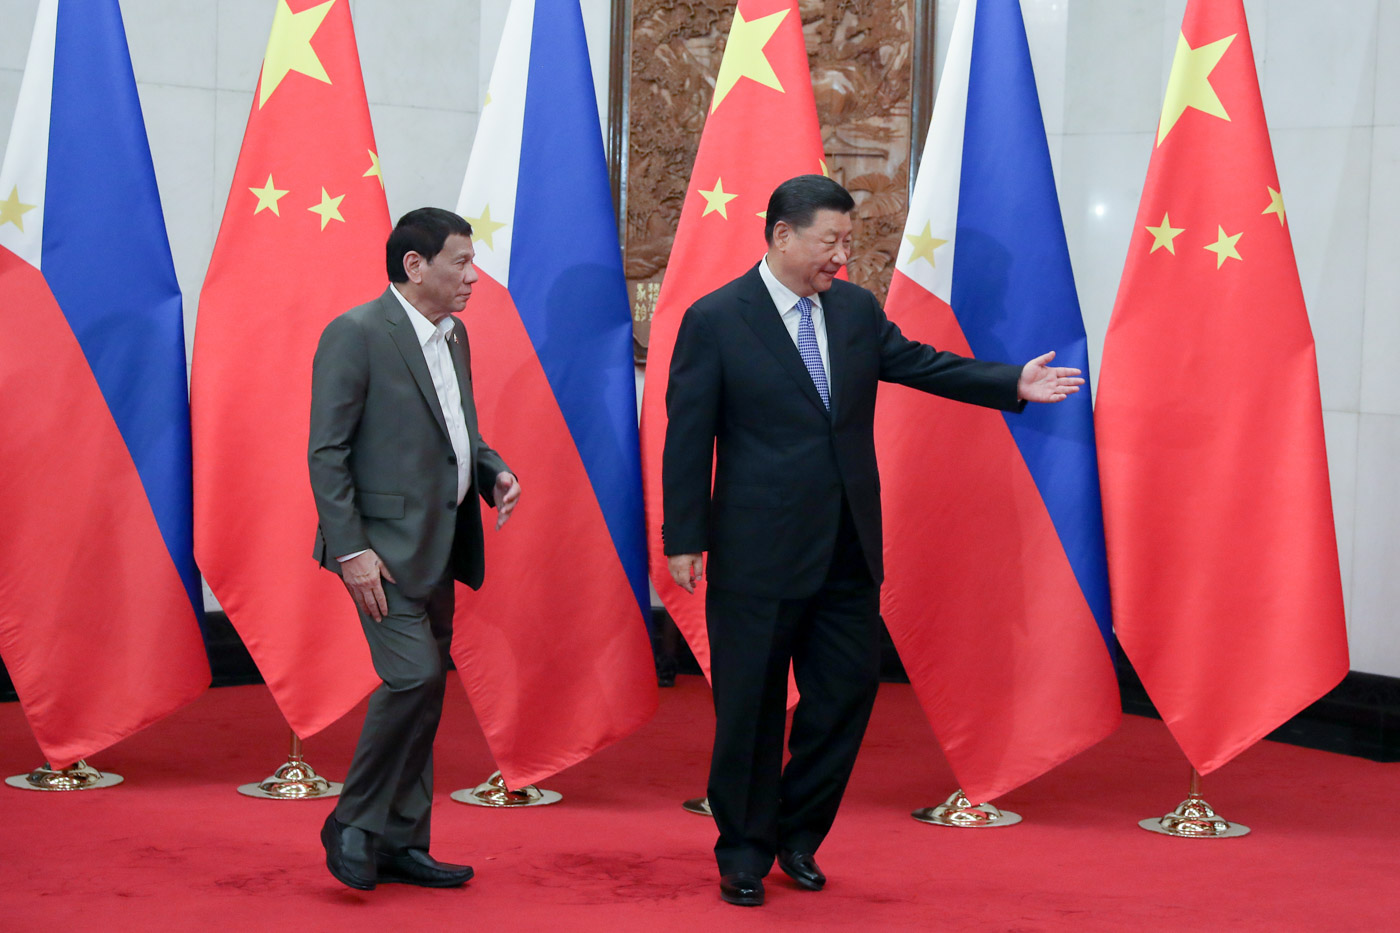 MUCH-AWAITED TALK. President Rodrigo Duterte is accompanied by People's Republic of China President Xi Jinping inside the Diaoyutai State Guesthouse in Beijing prior to their bilateral meeting on August 29, 2019. Malacañang photo 